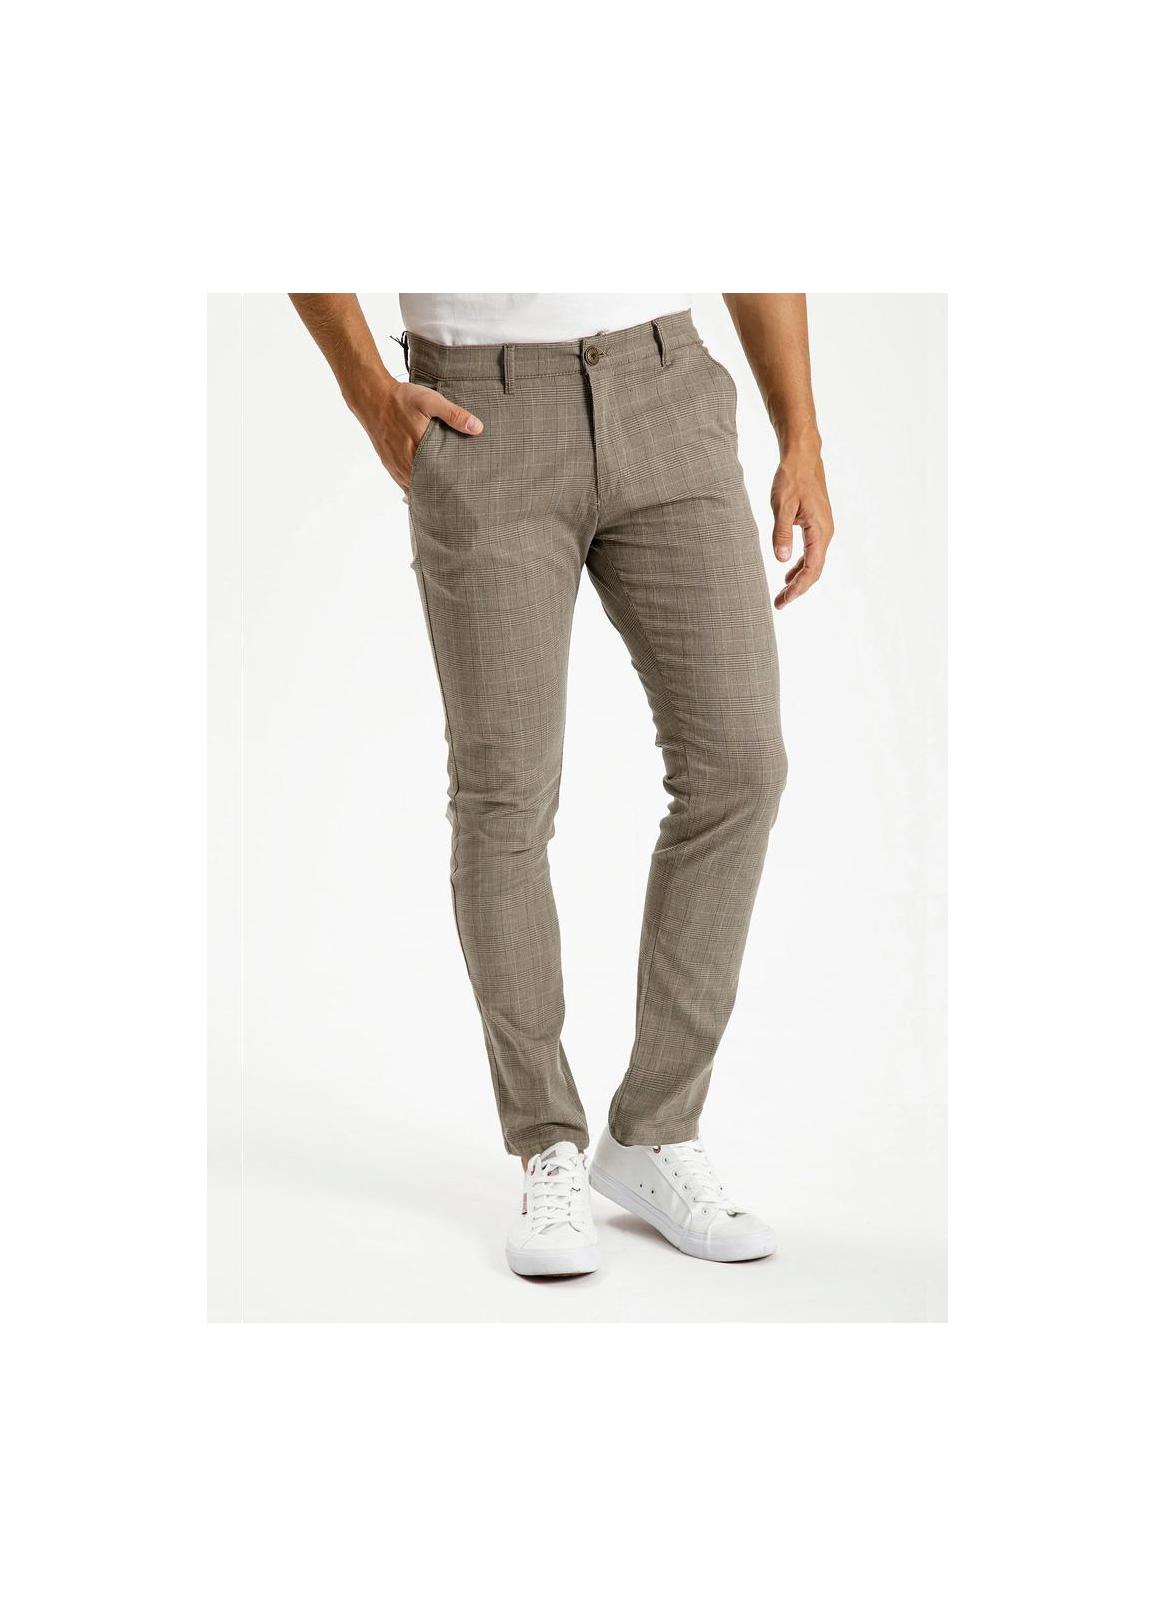 Cross Jeans® Chino Tapered Fit - Beige (200)